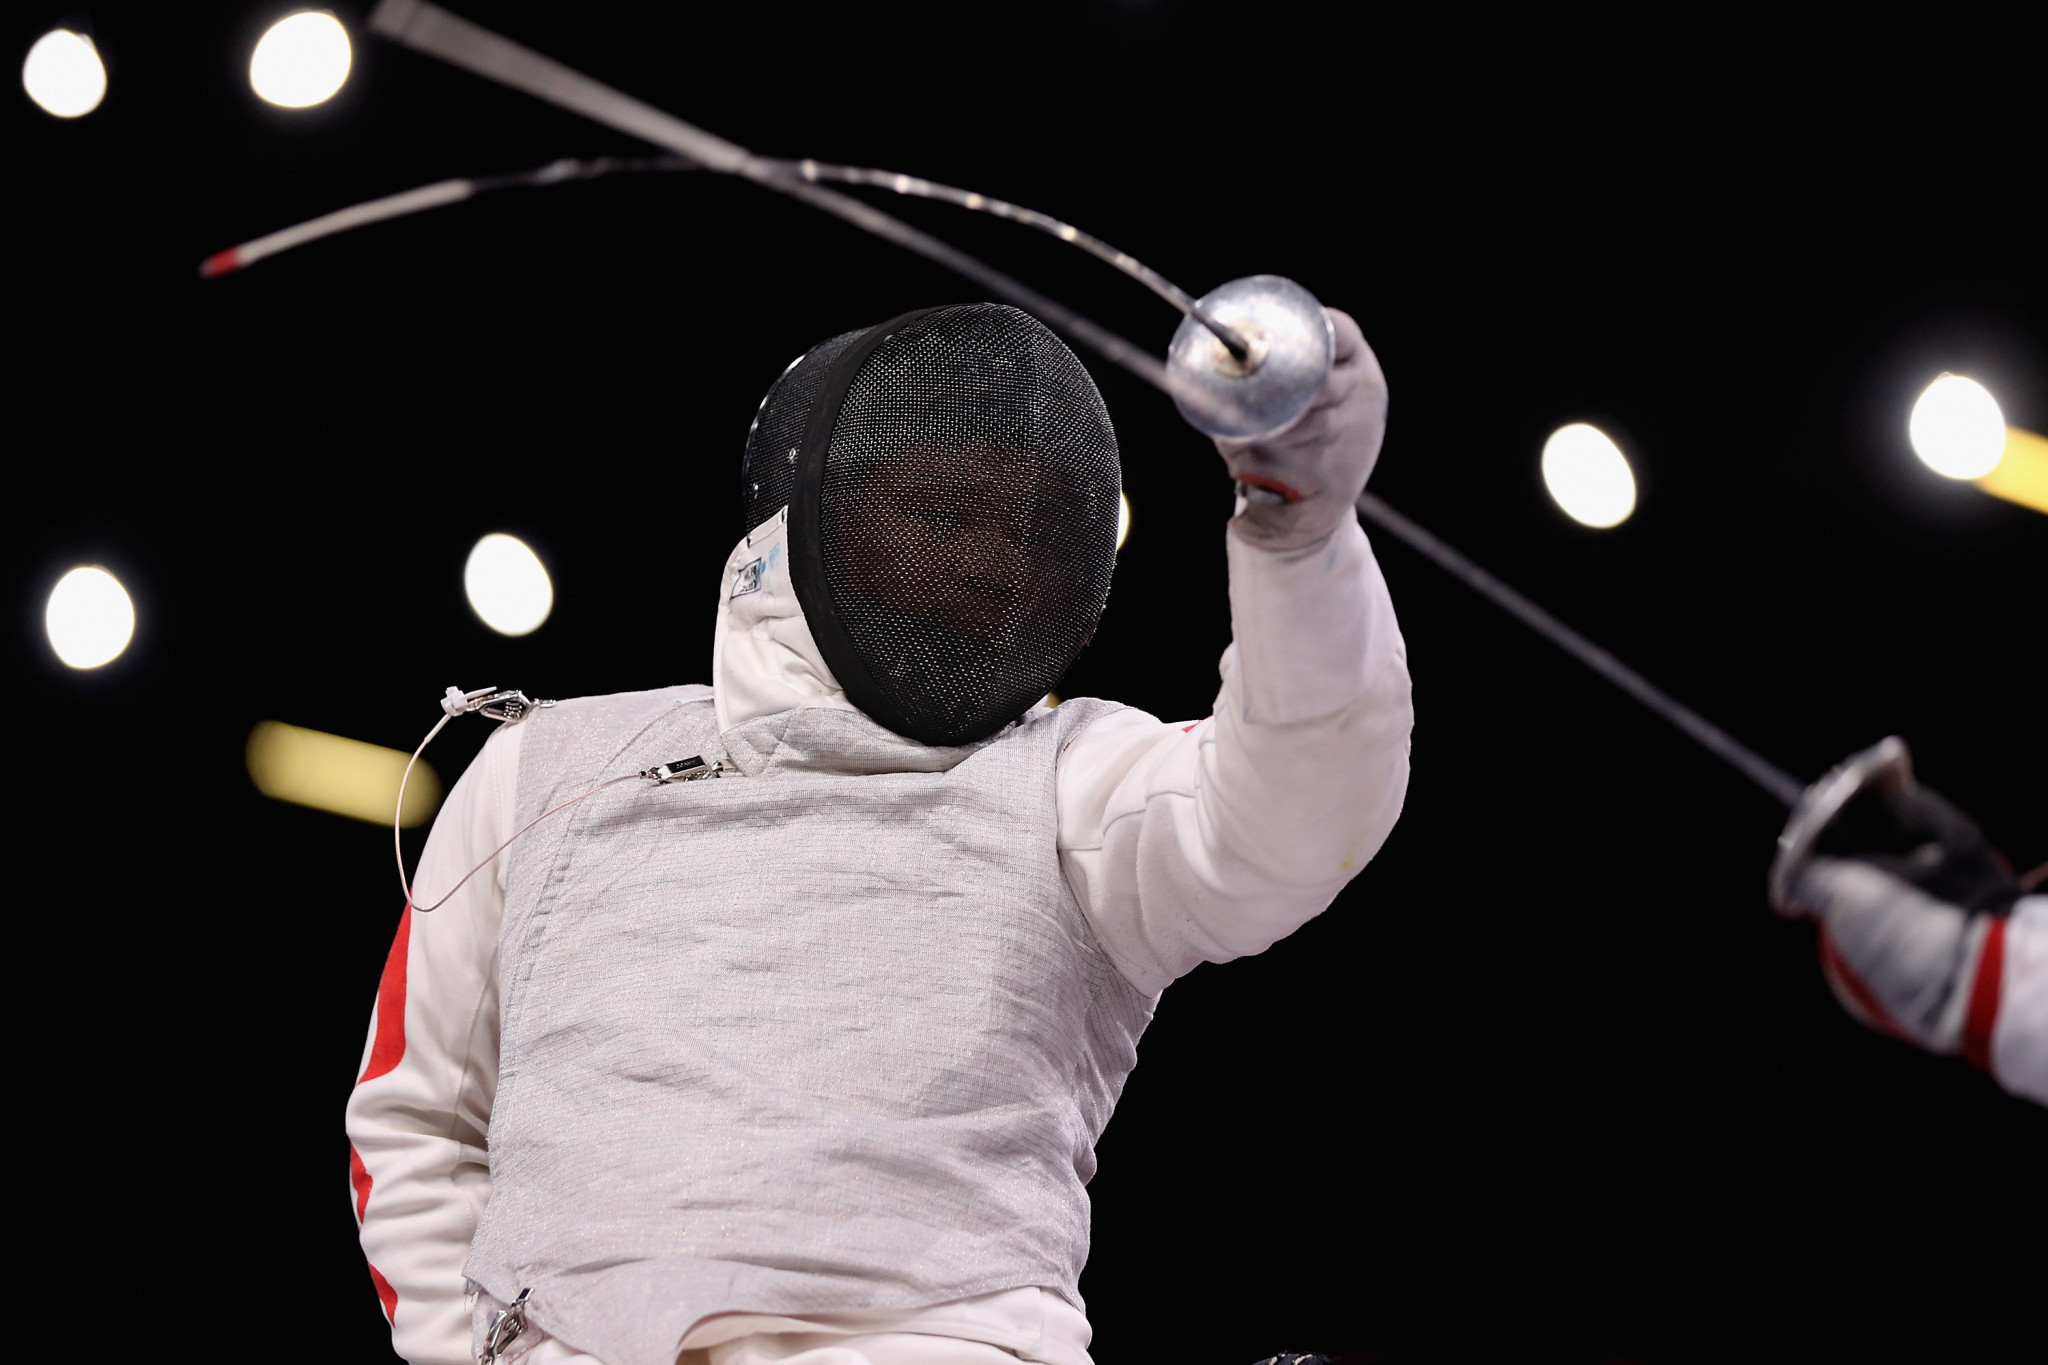 Double Paralympic champion Hu earns foil gold at IWAS Wheelchair Fencing World Cup